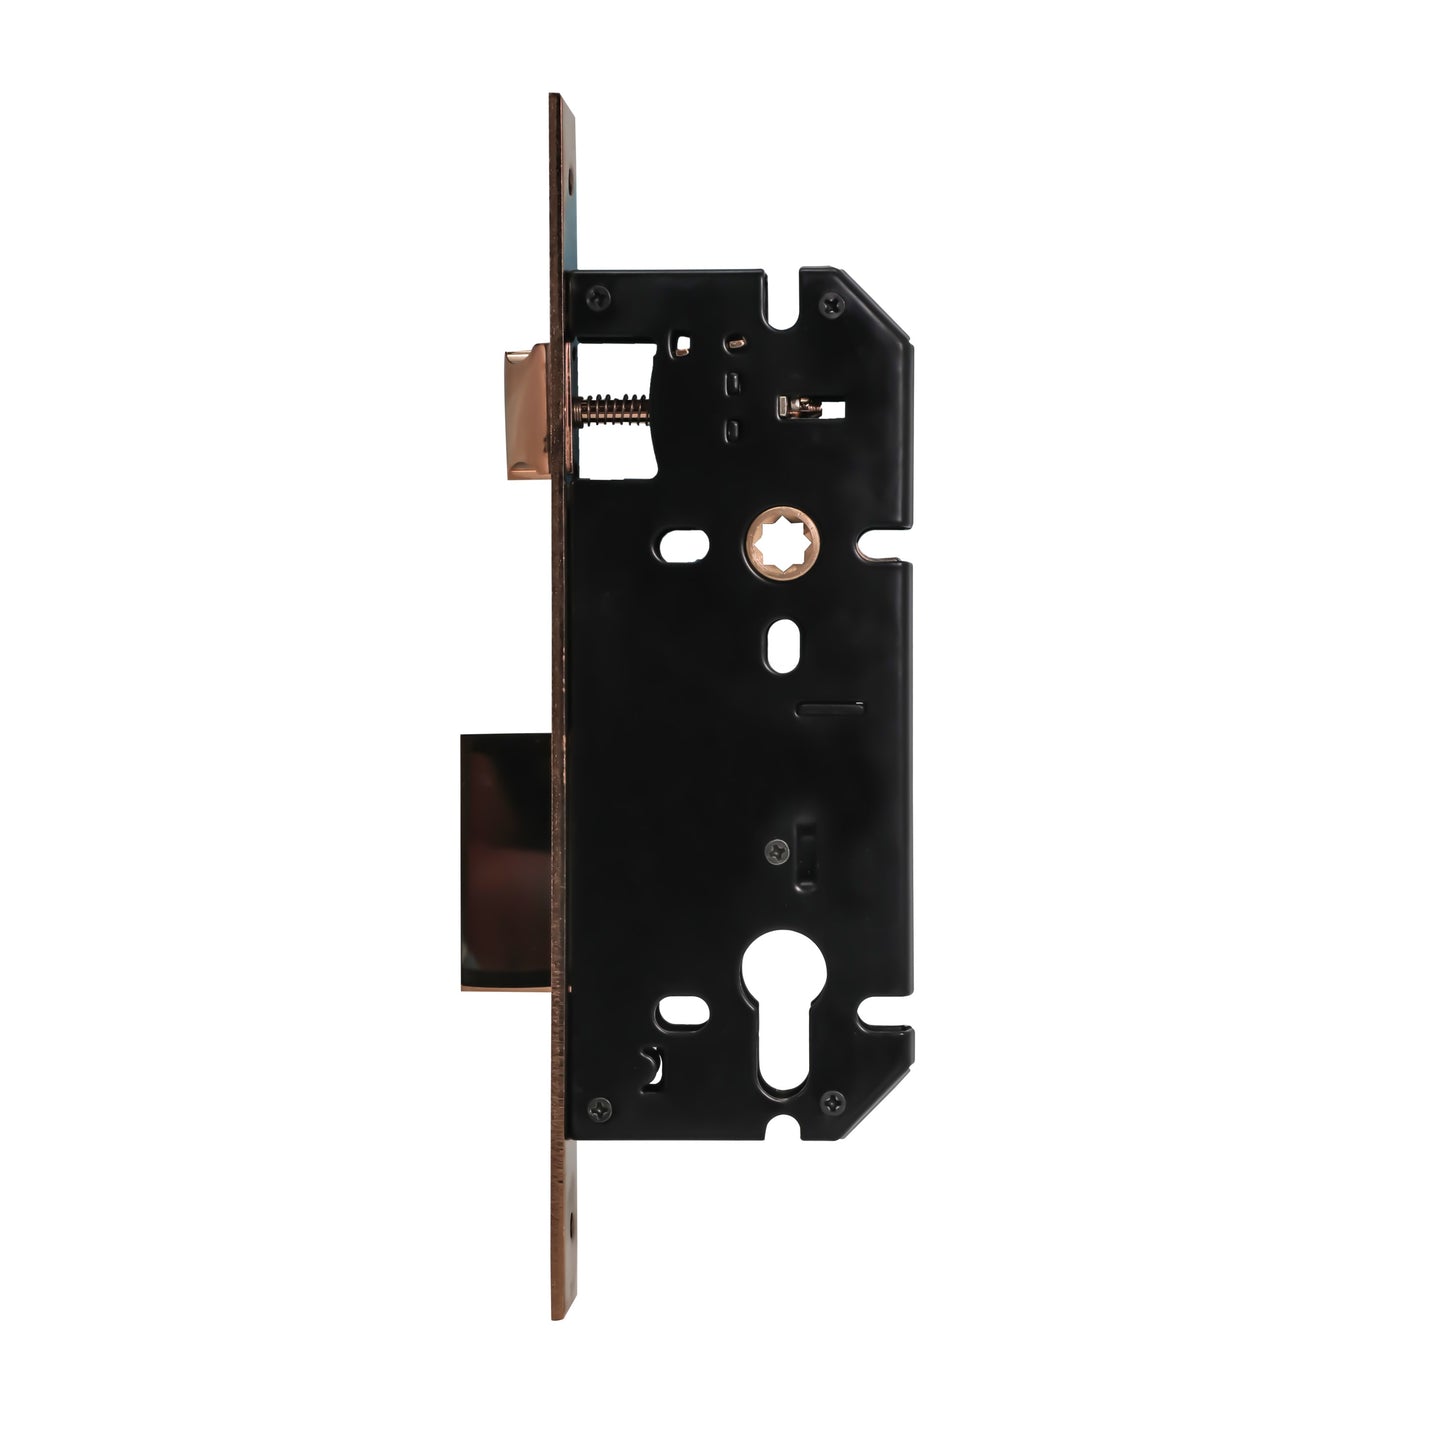 24-8560 Brass 04 PRG - Yale Mortise Lock, 85Mm C/C And 60Mm Bs, PVD RG